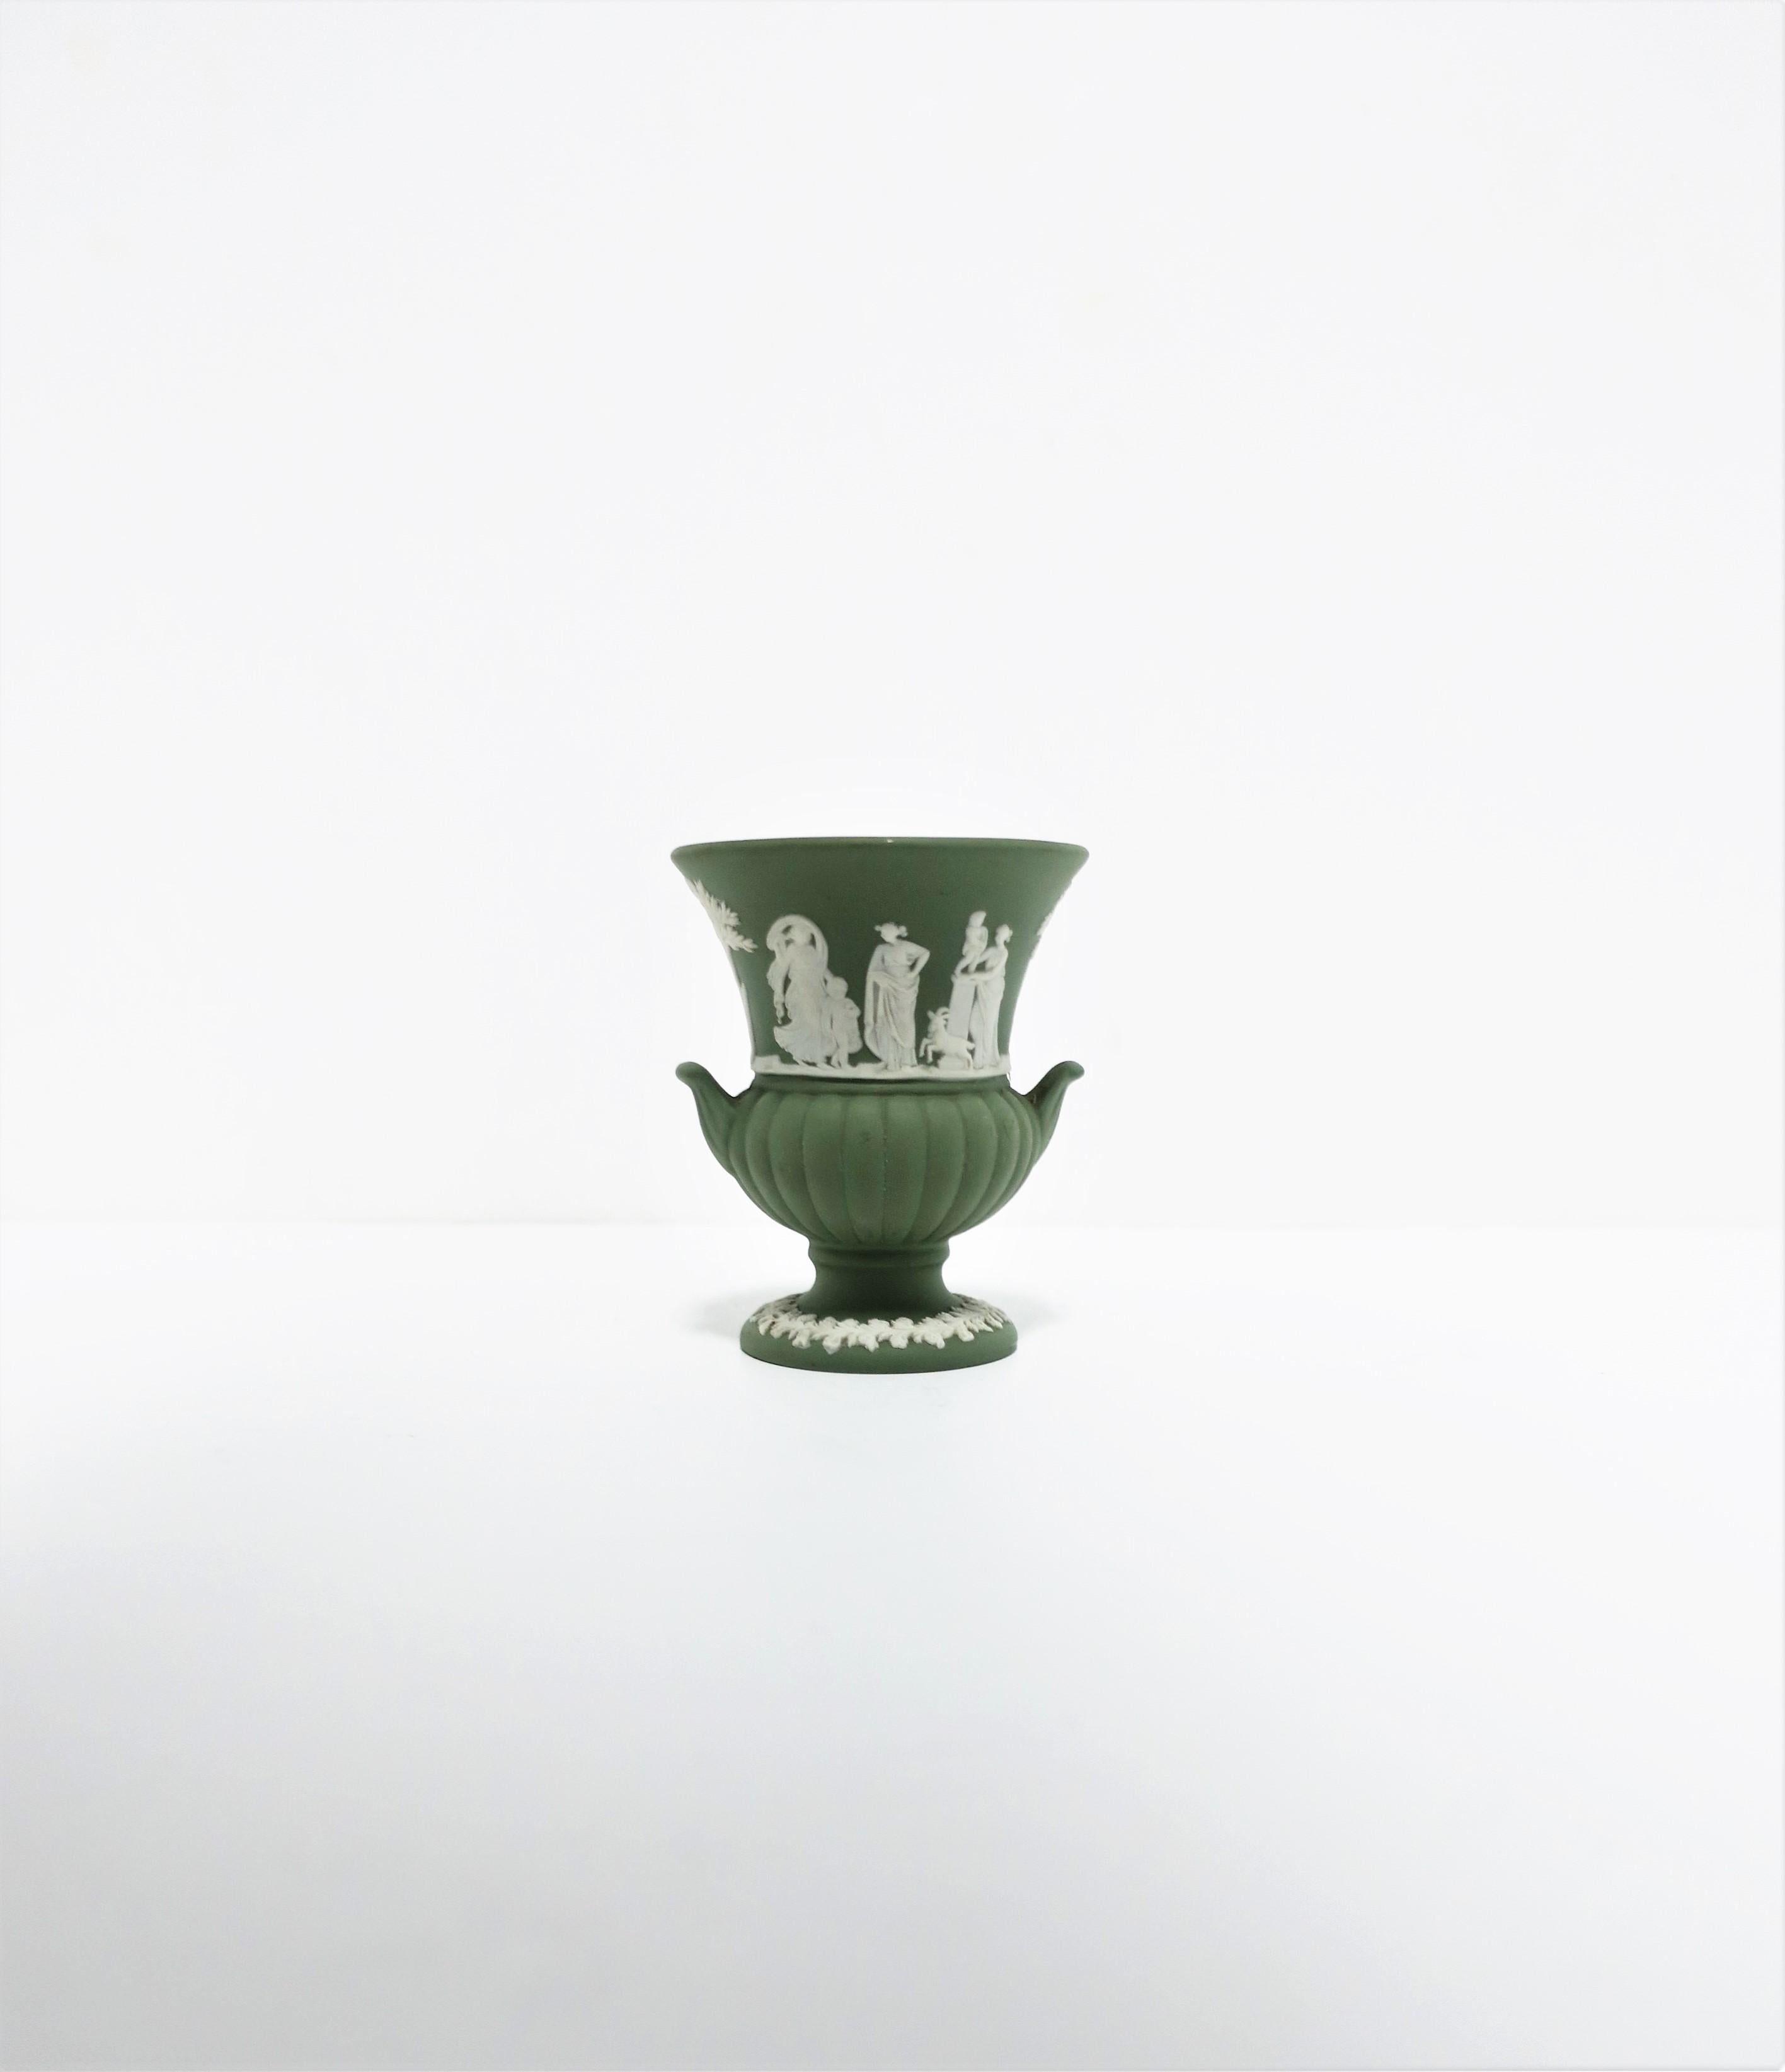 A beautiful, small, English Wedgwood Jasperware urn vase in the neoclassical design style, circa 20th century, England. Piece is a matte stoneware in a light green with a white neoclassical raised relief around center, a leaf design at bottom, and